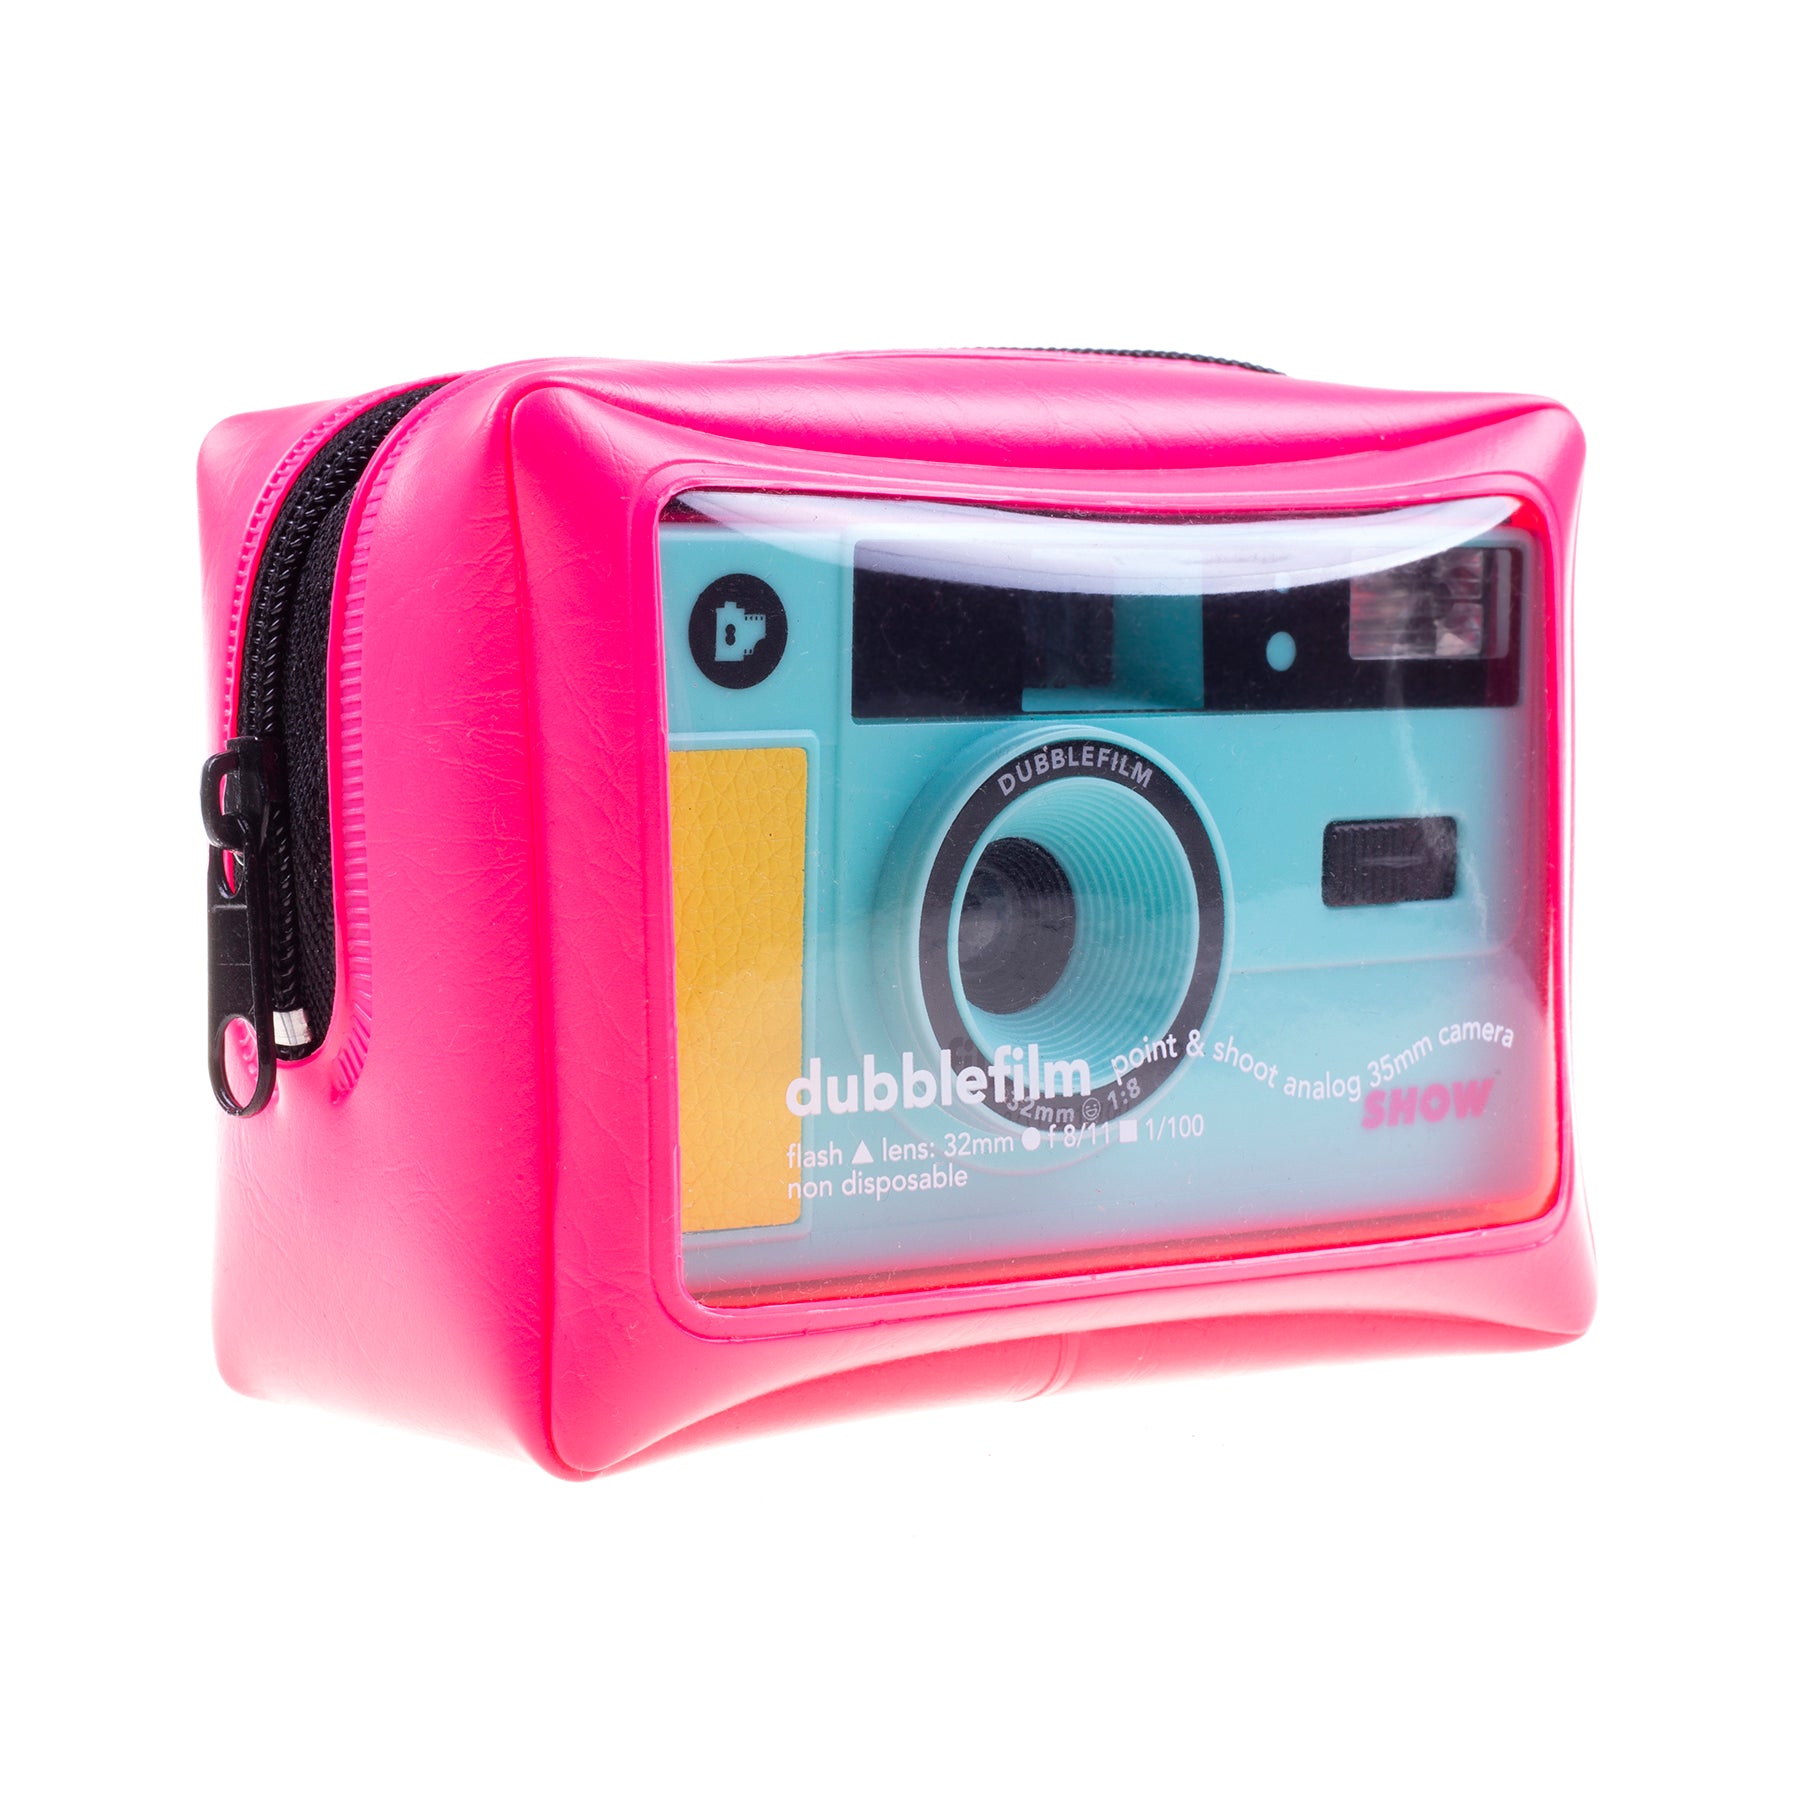 SHOW camera by Dubblefilm - Turquoise